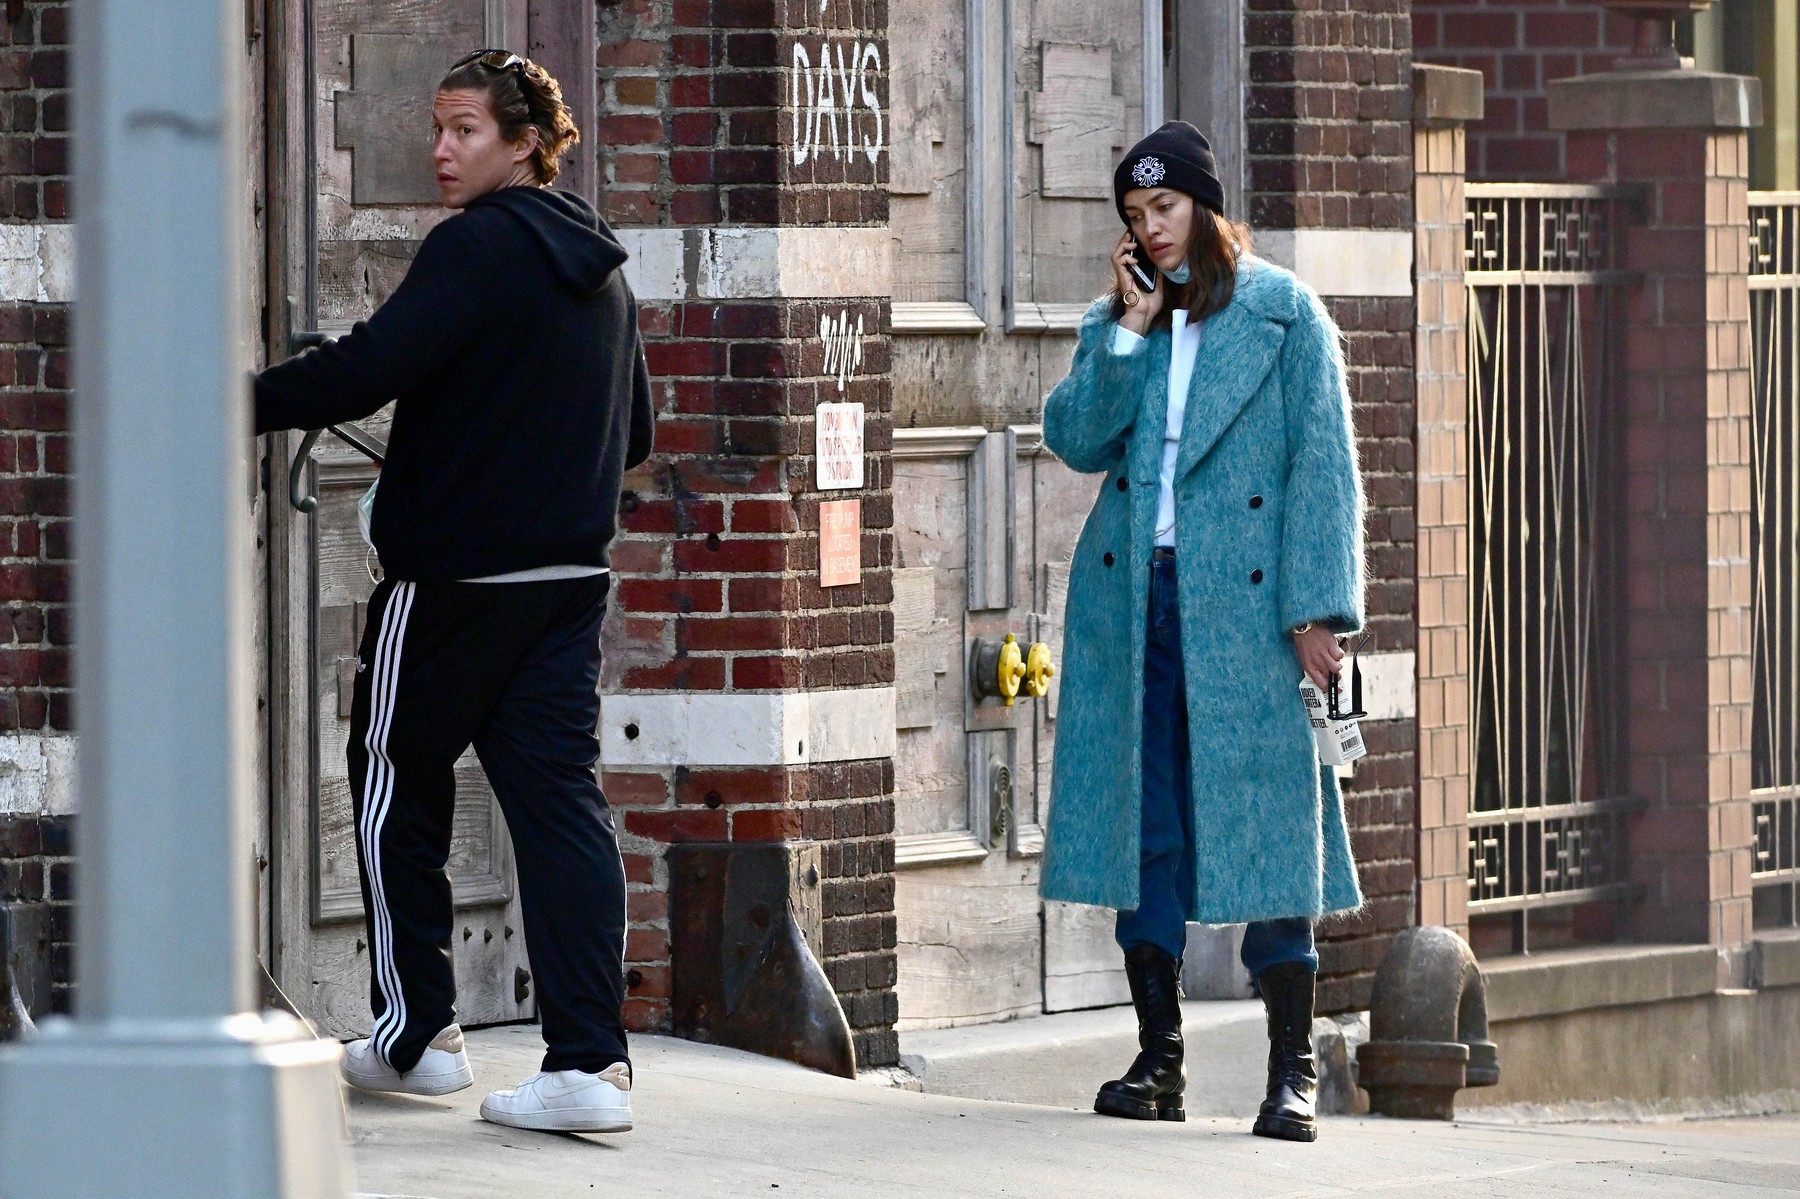 03/27/2020 PREMIUM EXCLUSIVE: Irina Shayk is spotted out for the first time with Vito Schnabel, sparking dating rumors. The duo kept close during the Coronavirus quarantine in New York City. The Russian supermodel and the art dealer took a walk together before heading back to Vito's apartment. Shayk split from Bradley Cooper in 2019, while Schnabel was last linked to Amber Heard, also in 2019., Image: 510969358, License: Rights-managed, Restrictions: Exclusive NO usage without agreed price and terms. Please contact sales@theimagedirect.com, Model Release: no, Credit line: TheImageDirect.com / The Image Direct / Profimedia